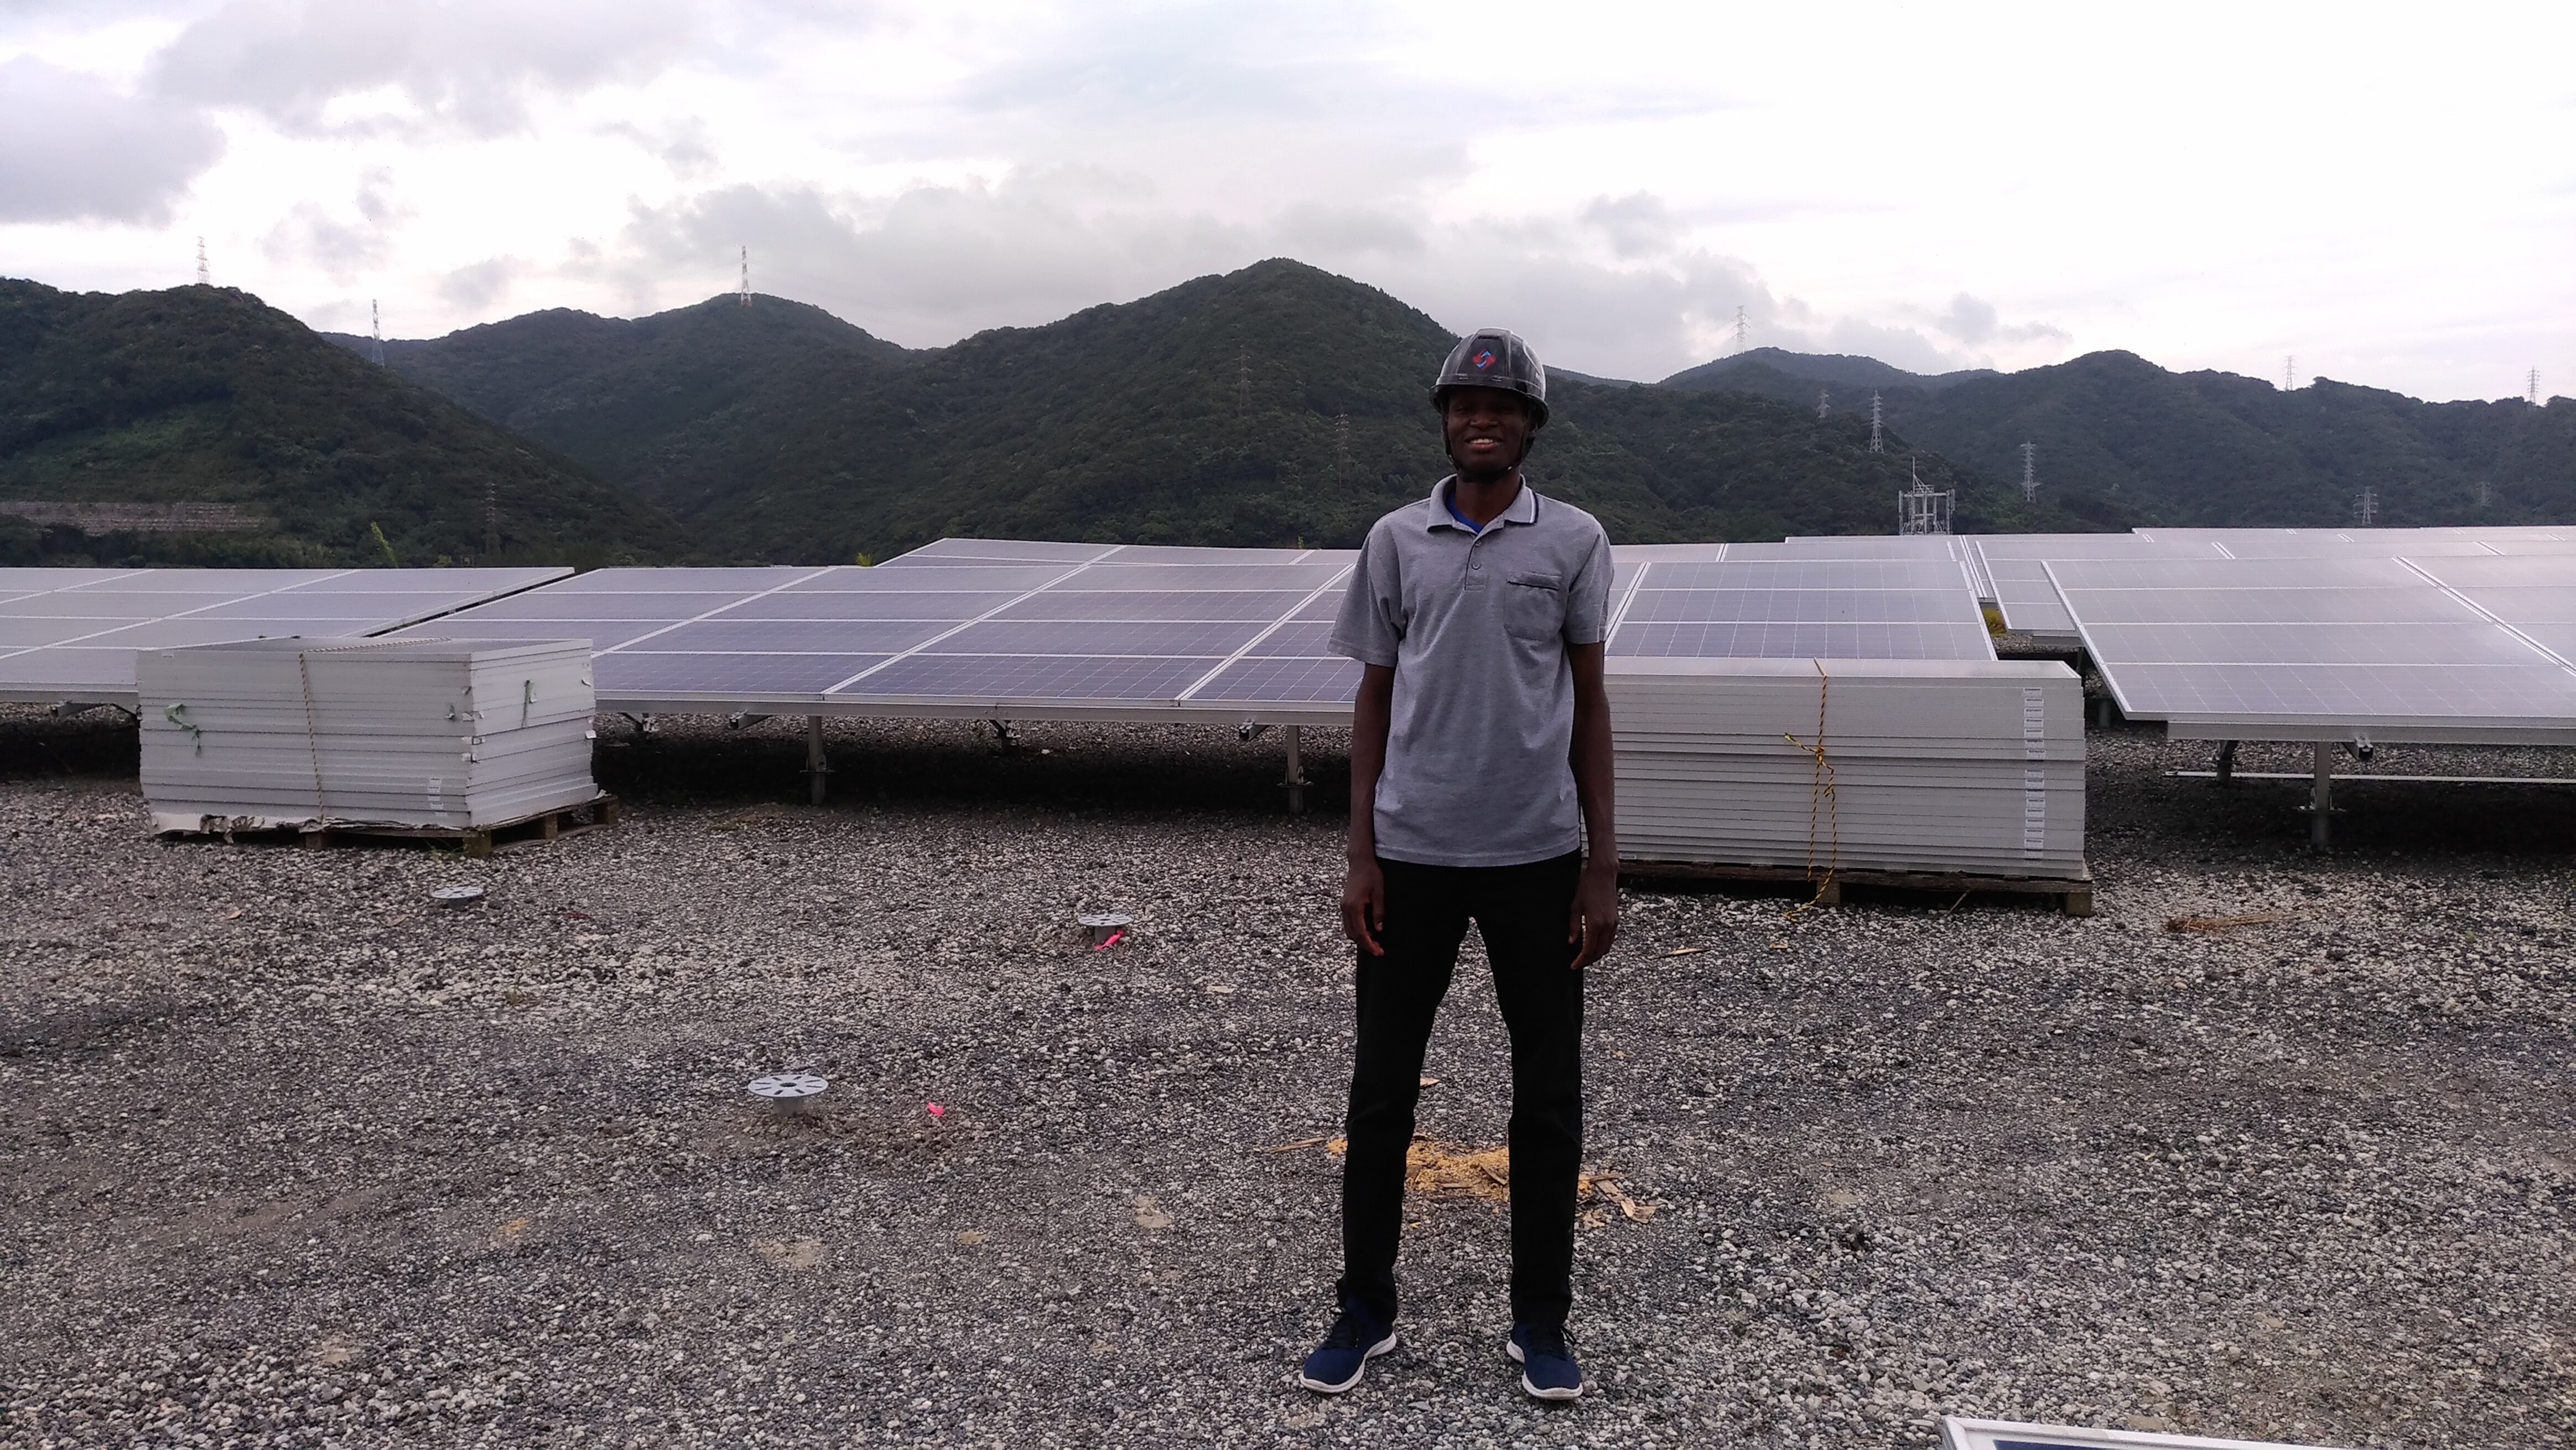 Mr. Momar's dream is to contribute to the development of his home country of Senegal by supplying electricity to areas without electricity using Japanese technology